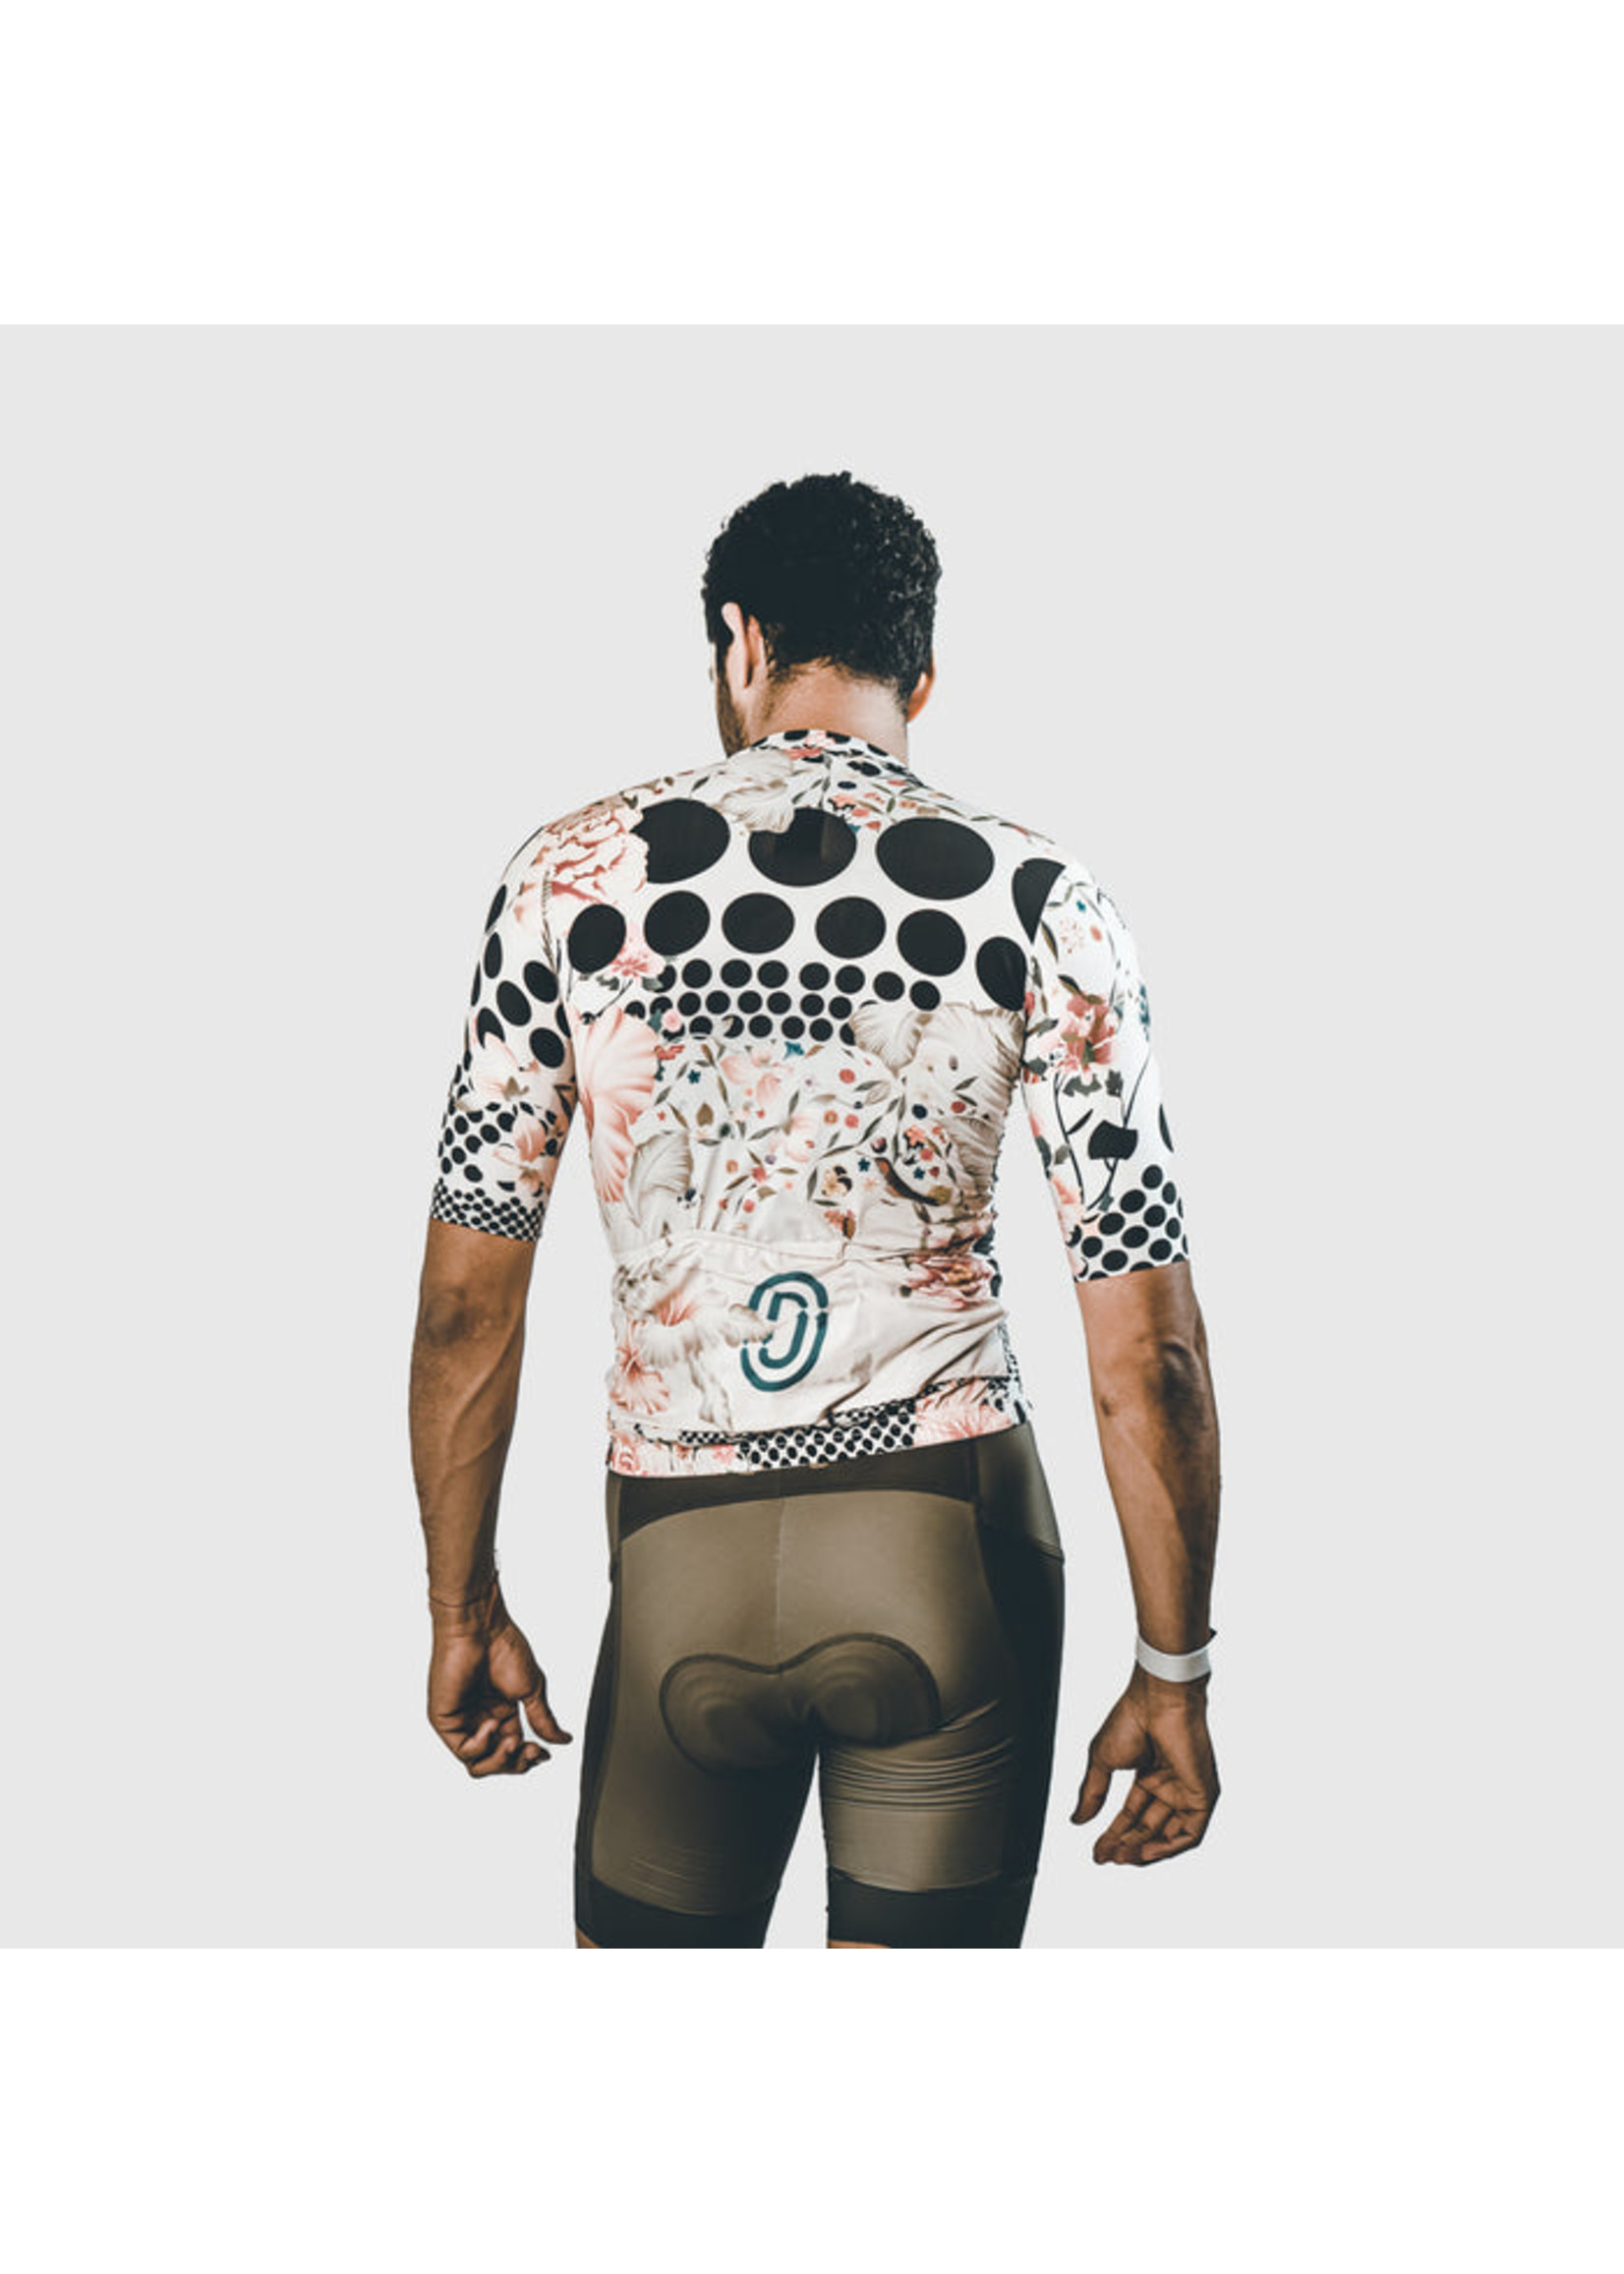 Men's Cycling Collection – Ostroy